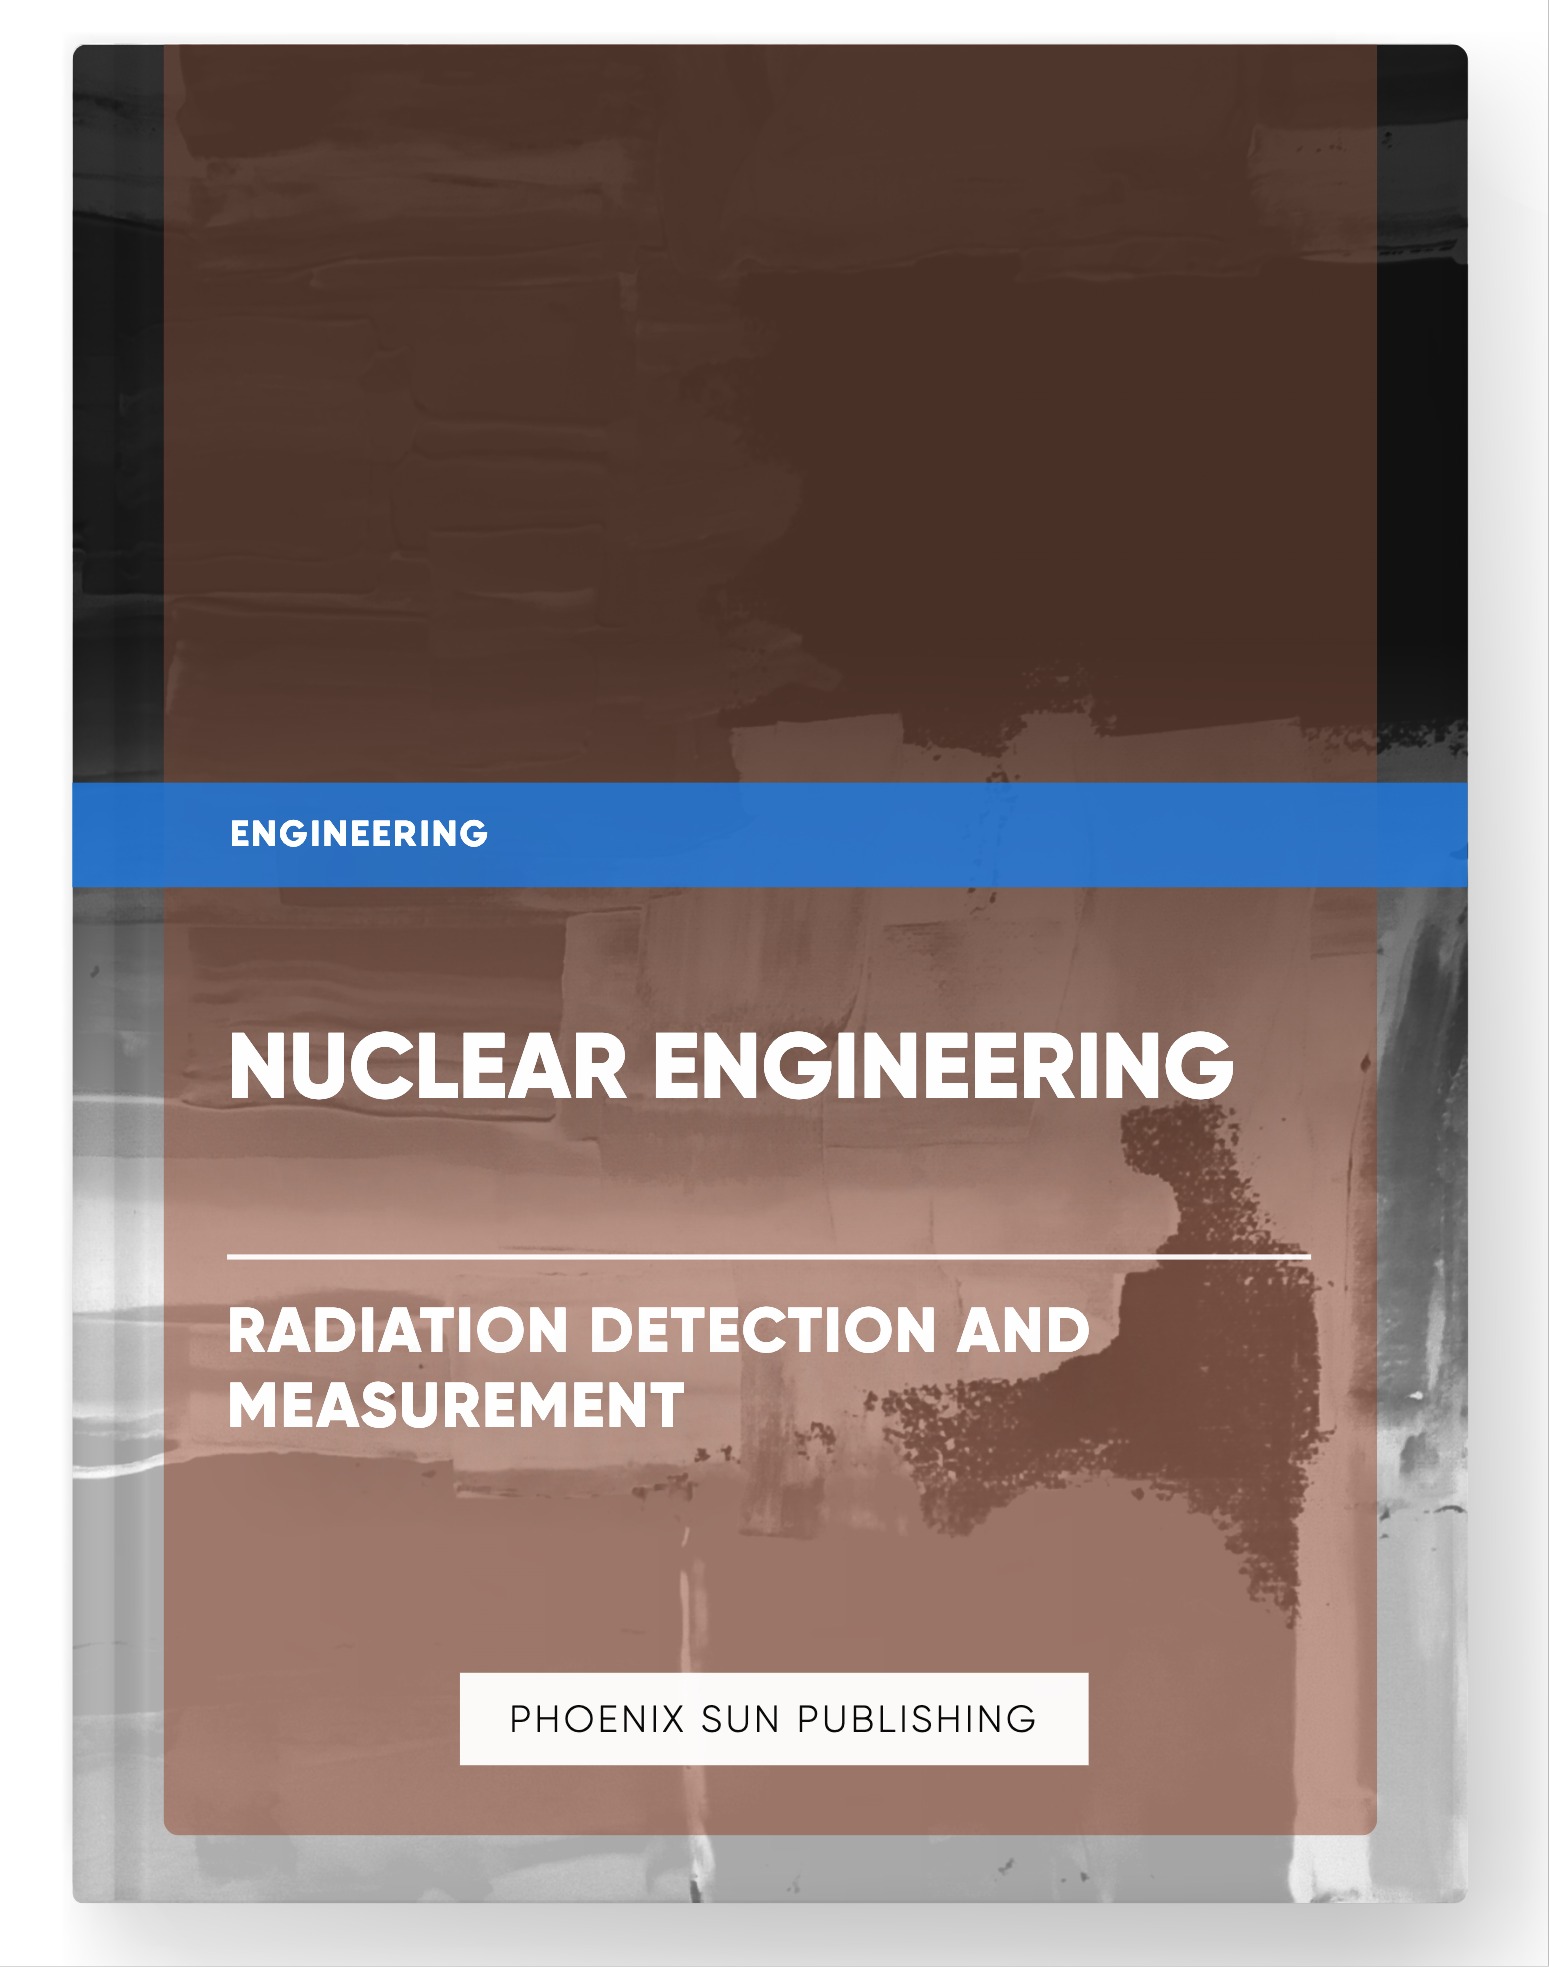 Nuclear Engineering – Radiation Detection and Measurement